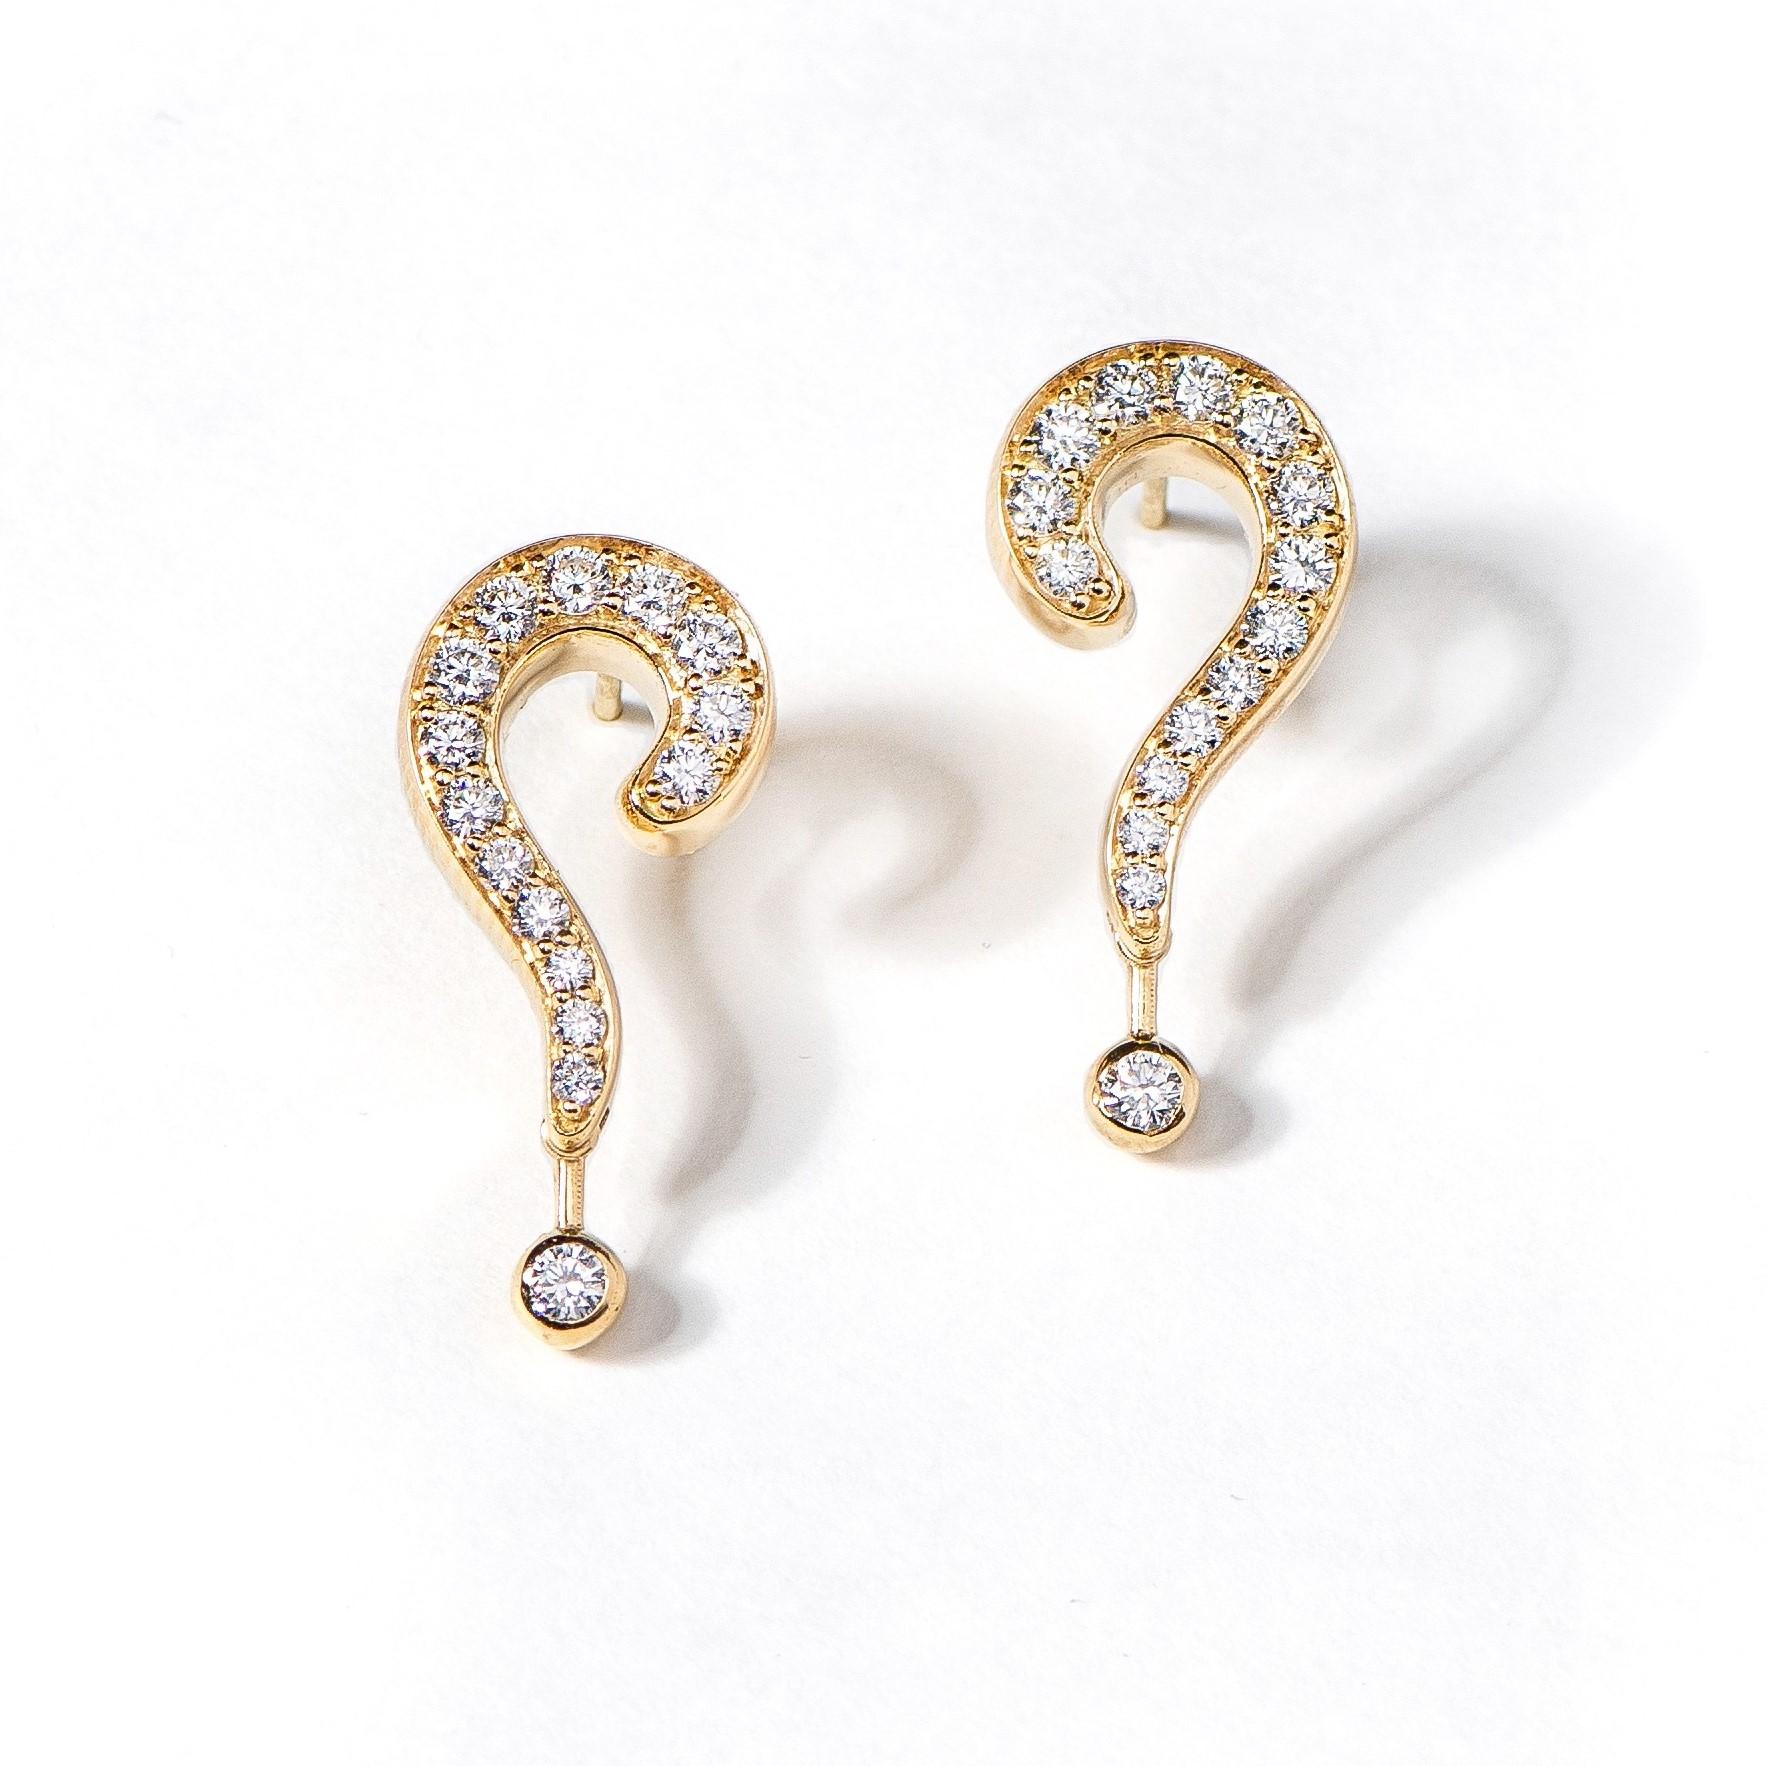 The Question mark, diamond ear pendants are crafted in 18K yellow gold, hallmarked one Cyprus. These stunning ear pendants come in a highly polished finish and are set with 1 Ct white Diamonds. The Question mark, ear pendants are part of Maria